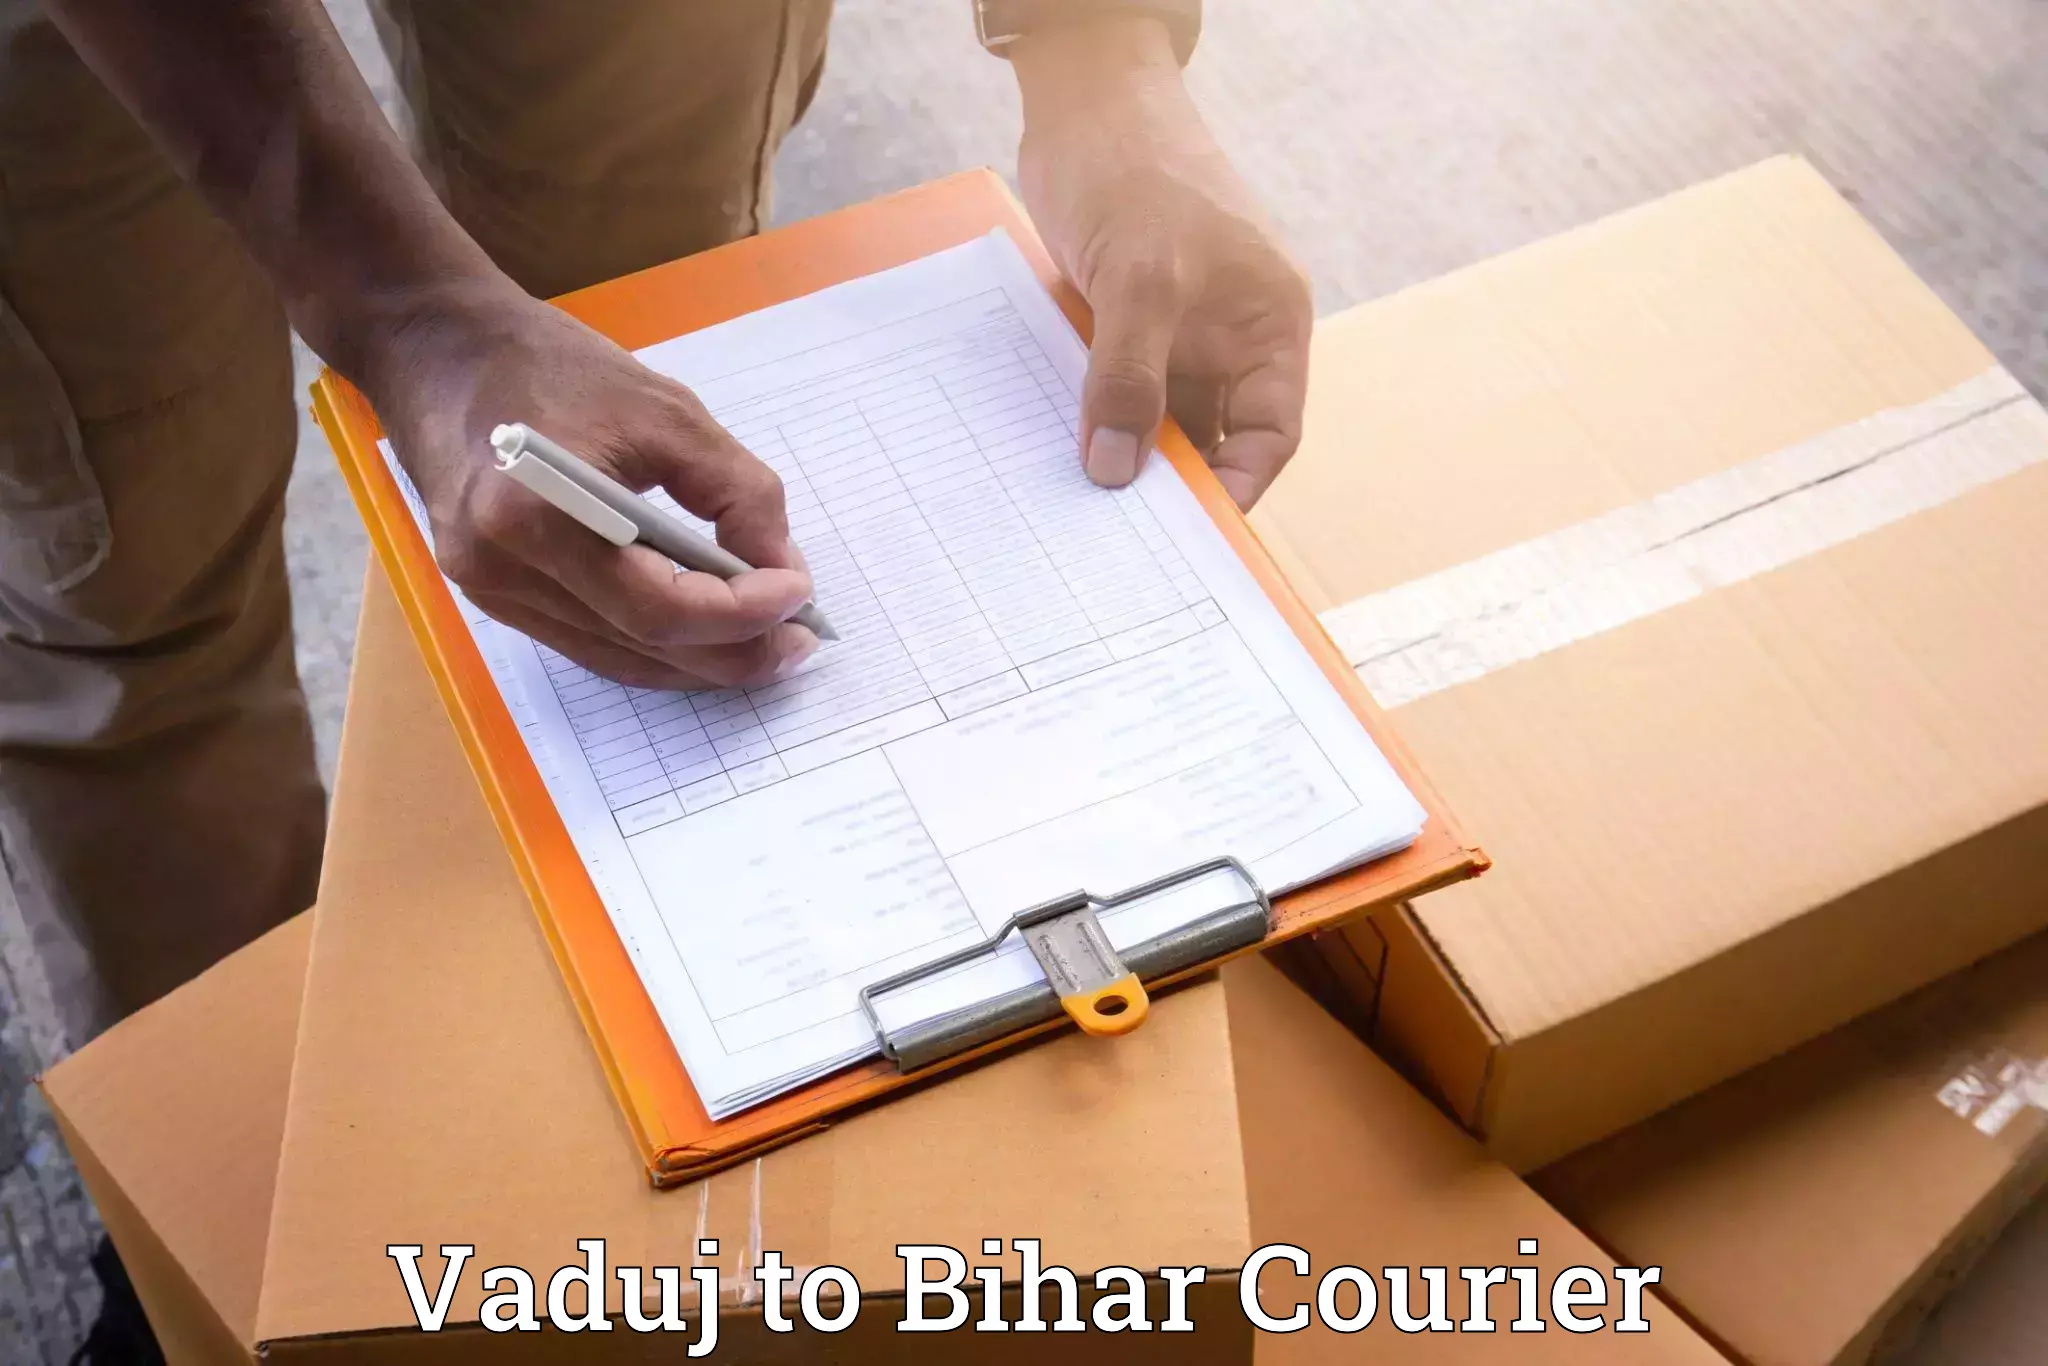 Furniture delivery service Vaduj to Biraul